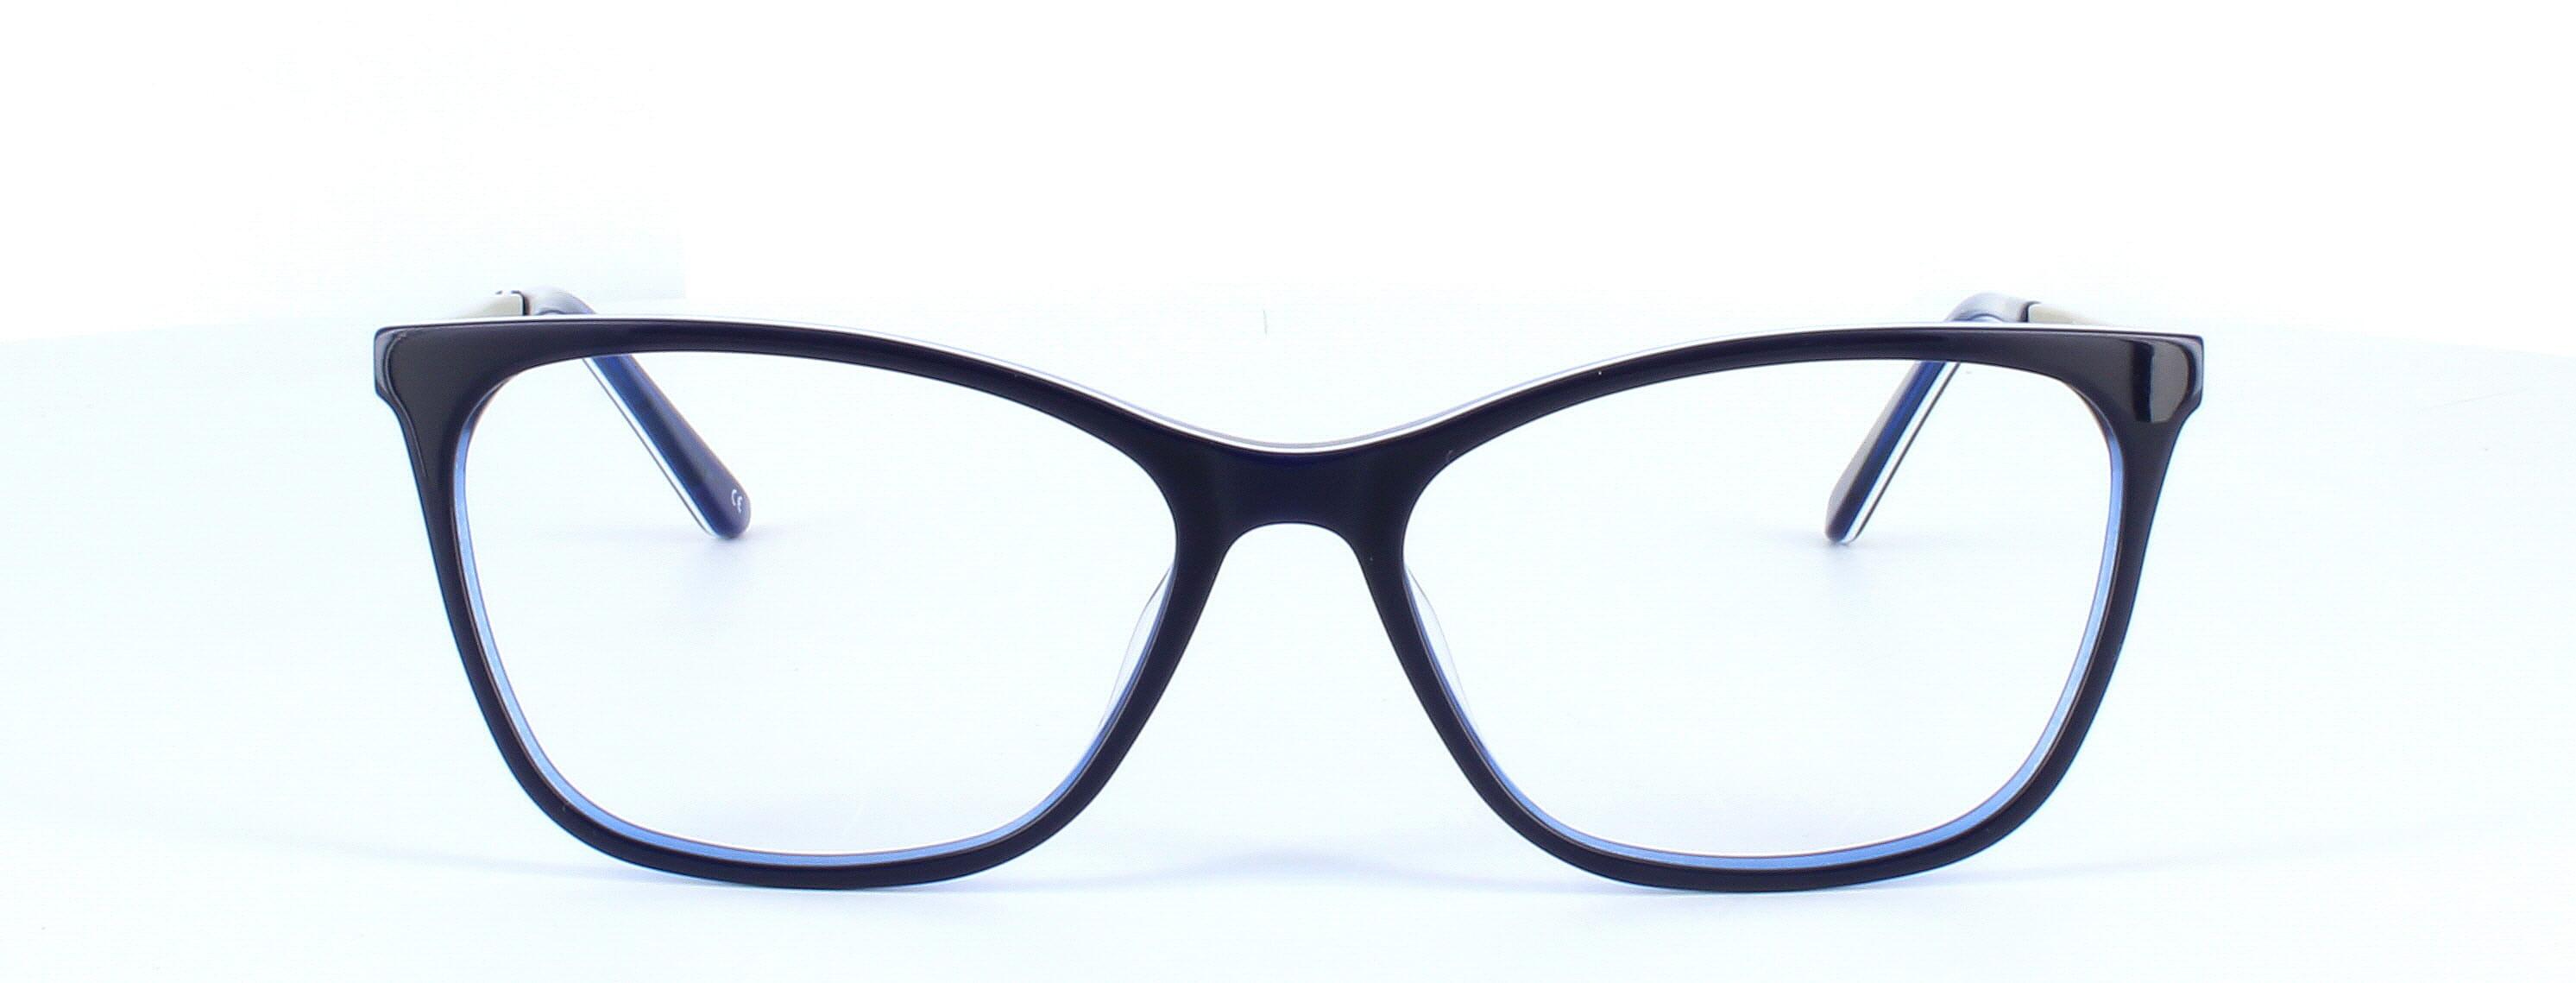 Ballina - ladies cat eye shaped acetate glasses here in blue - image view 5